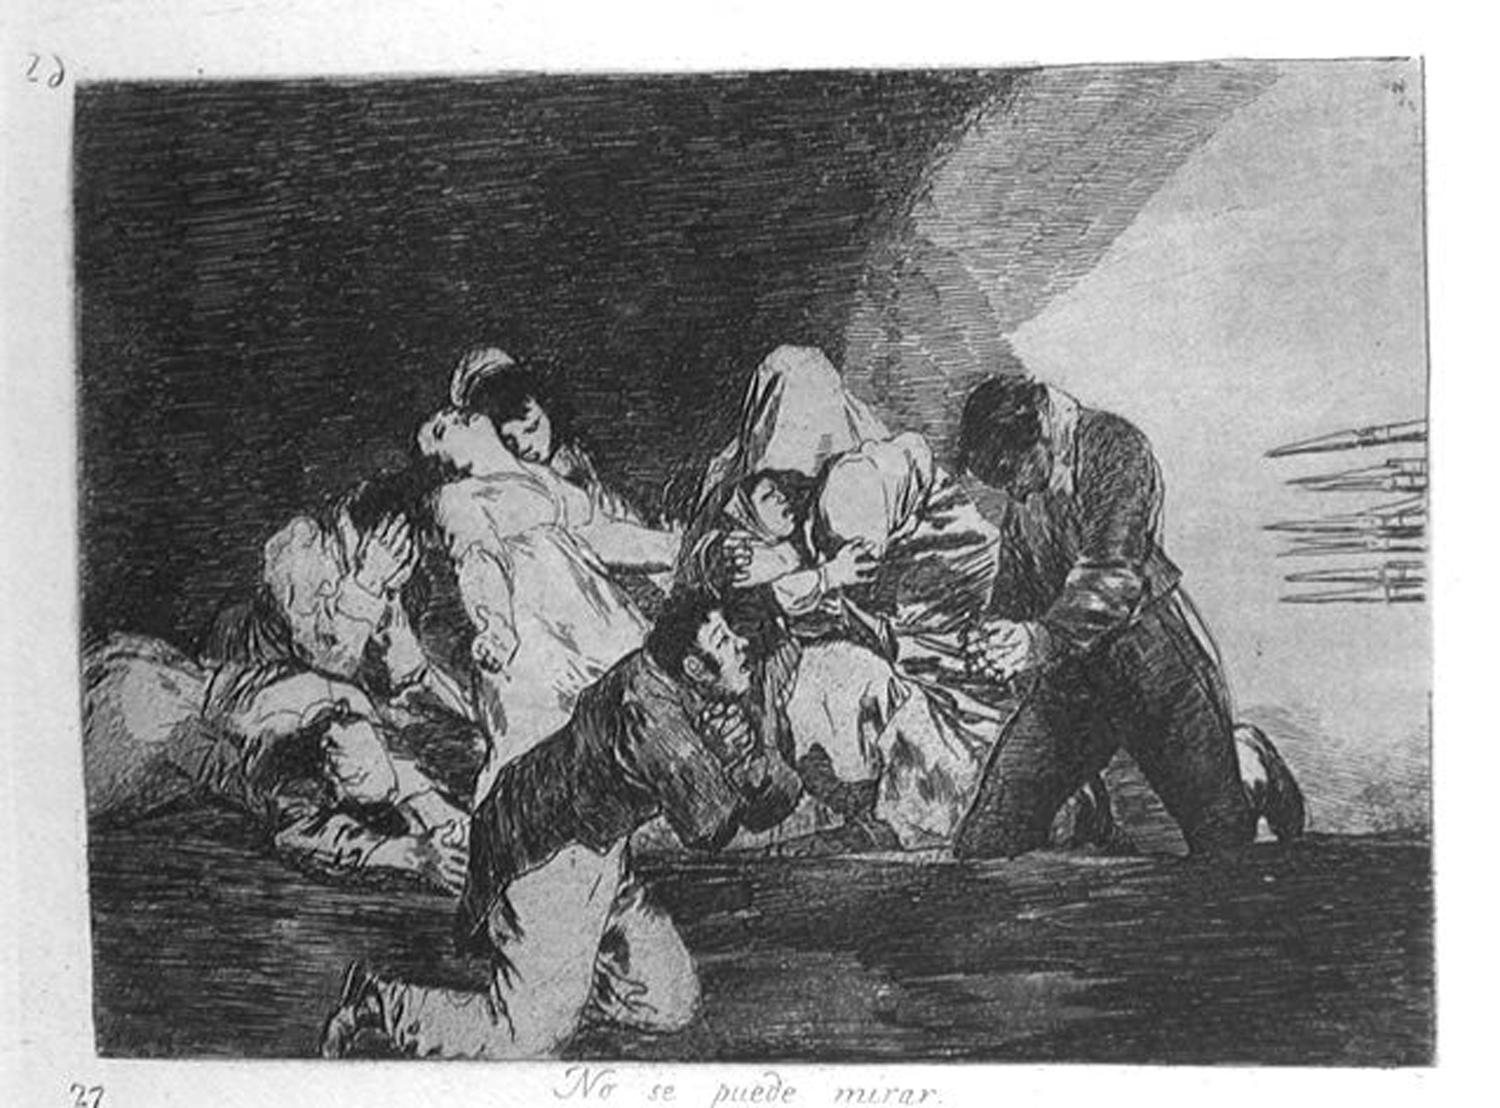 Artist: Francisco Goya
Title: One Can't Look
Portfolio: Disasters of War
Medium: Original lithograph
Year: 1863 (later reprint)
Framed Size: 15 1/2" x 16 3/4"
Sheet Size: 7" x 8 1/2"